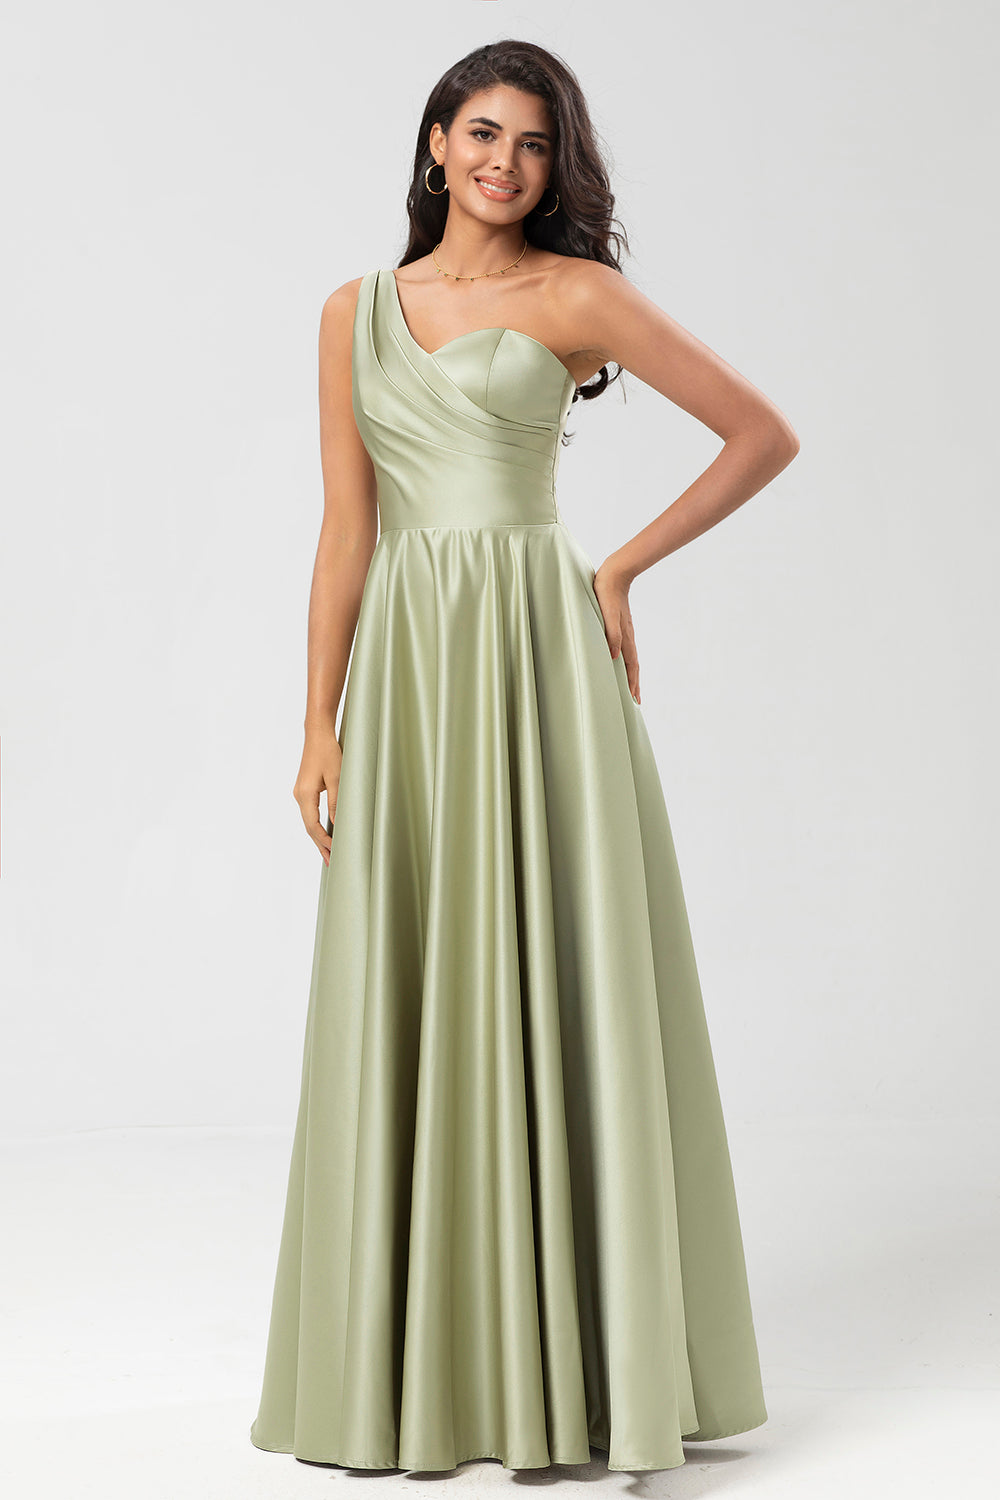 Dusty Sage A-Line One Shoulder Ruched Satin Bridesmaid Dress with Pocket